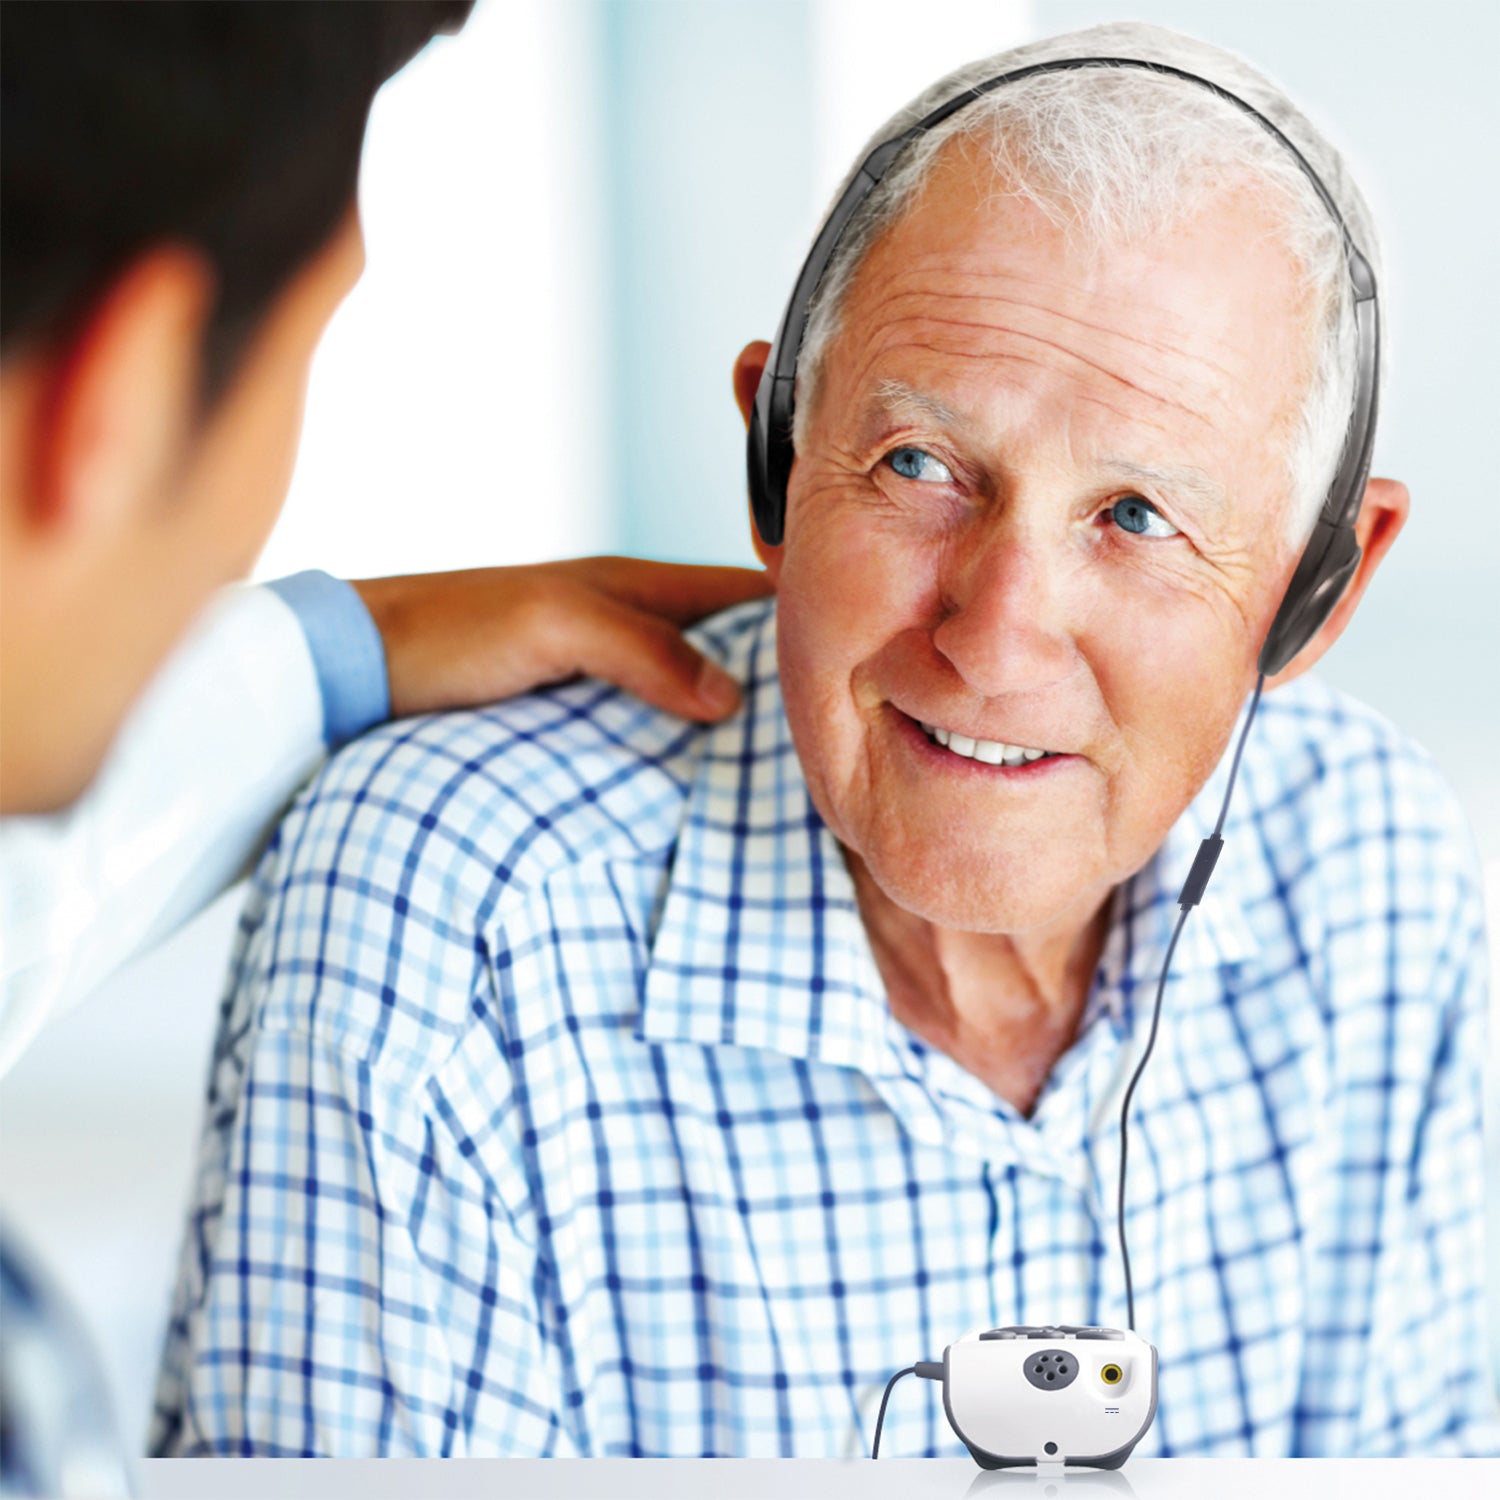 Hearing & Healthcare Products